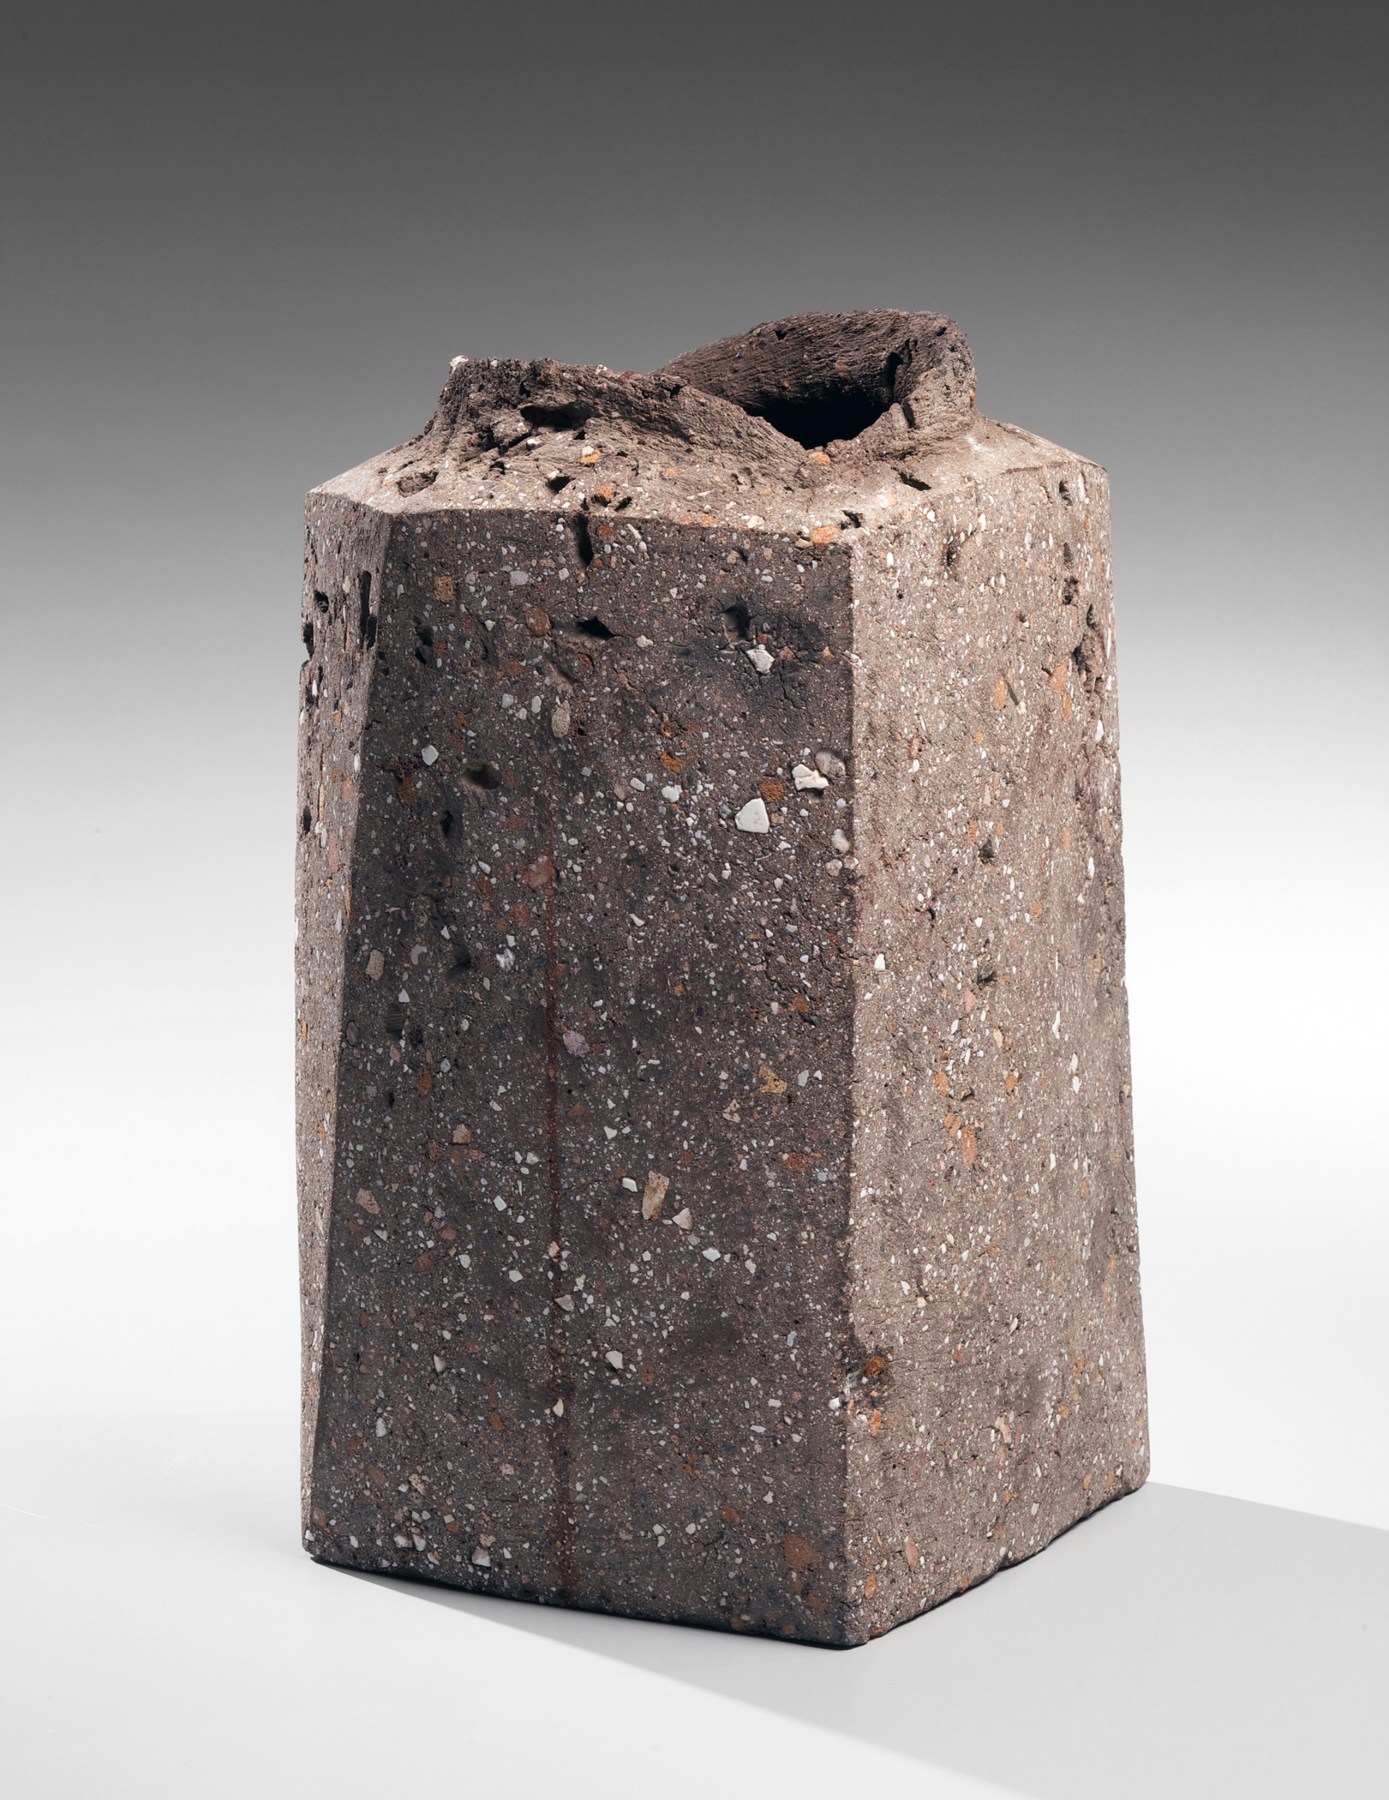 Itō Sekisui V (b. 1941), Standing four-sided rough grey vessel with raised torn mouth